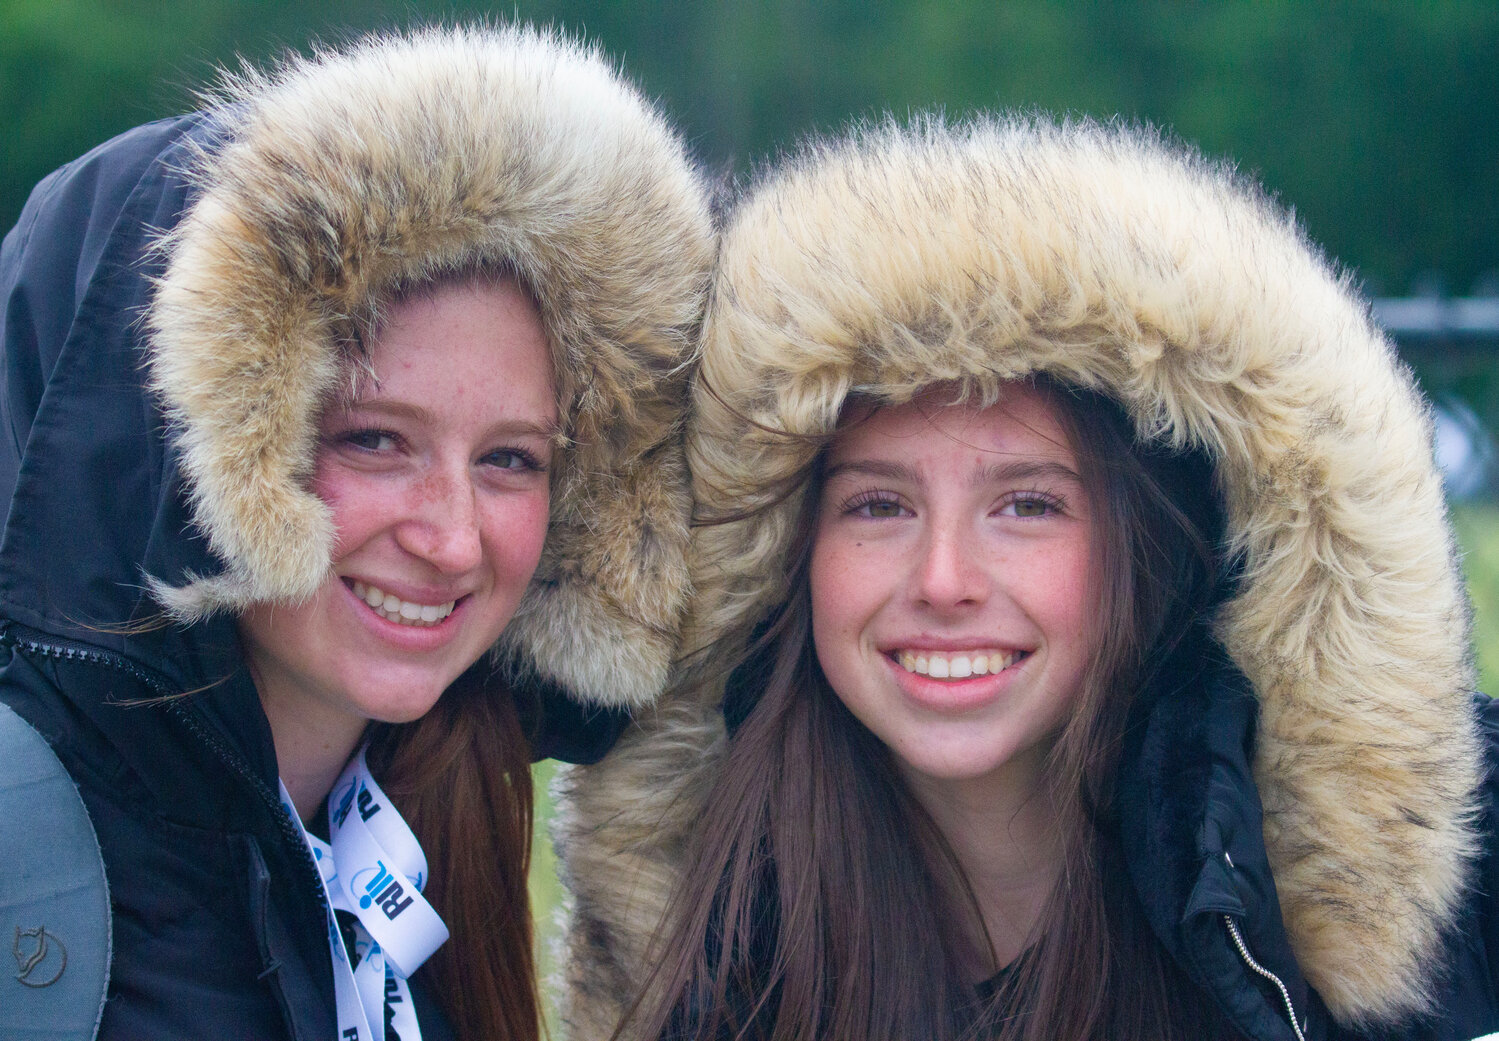 Lola Silva (left) and Kali Rocha of the Mt. Hope track team stay warm in their parkas while waiting to compete.